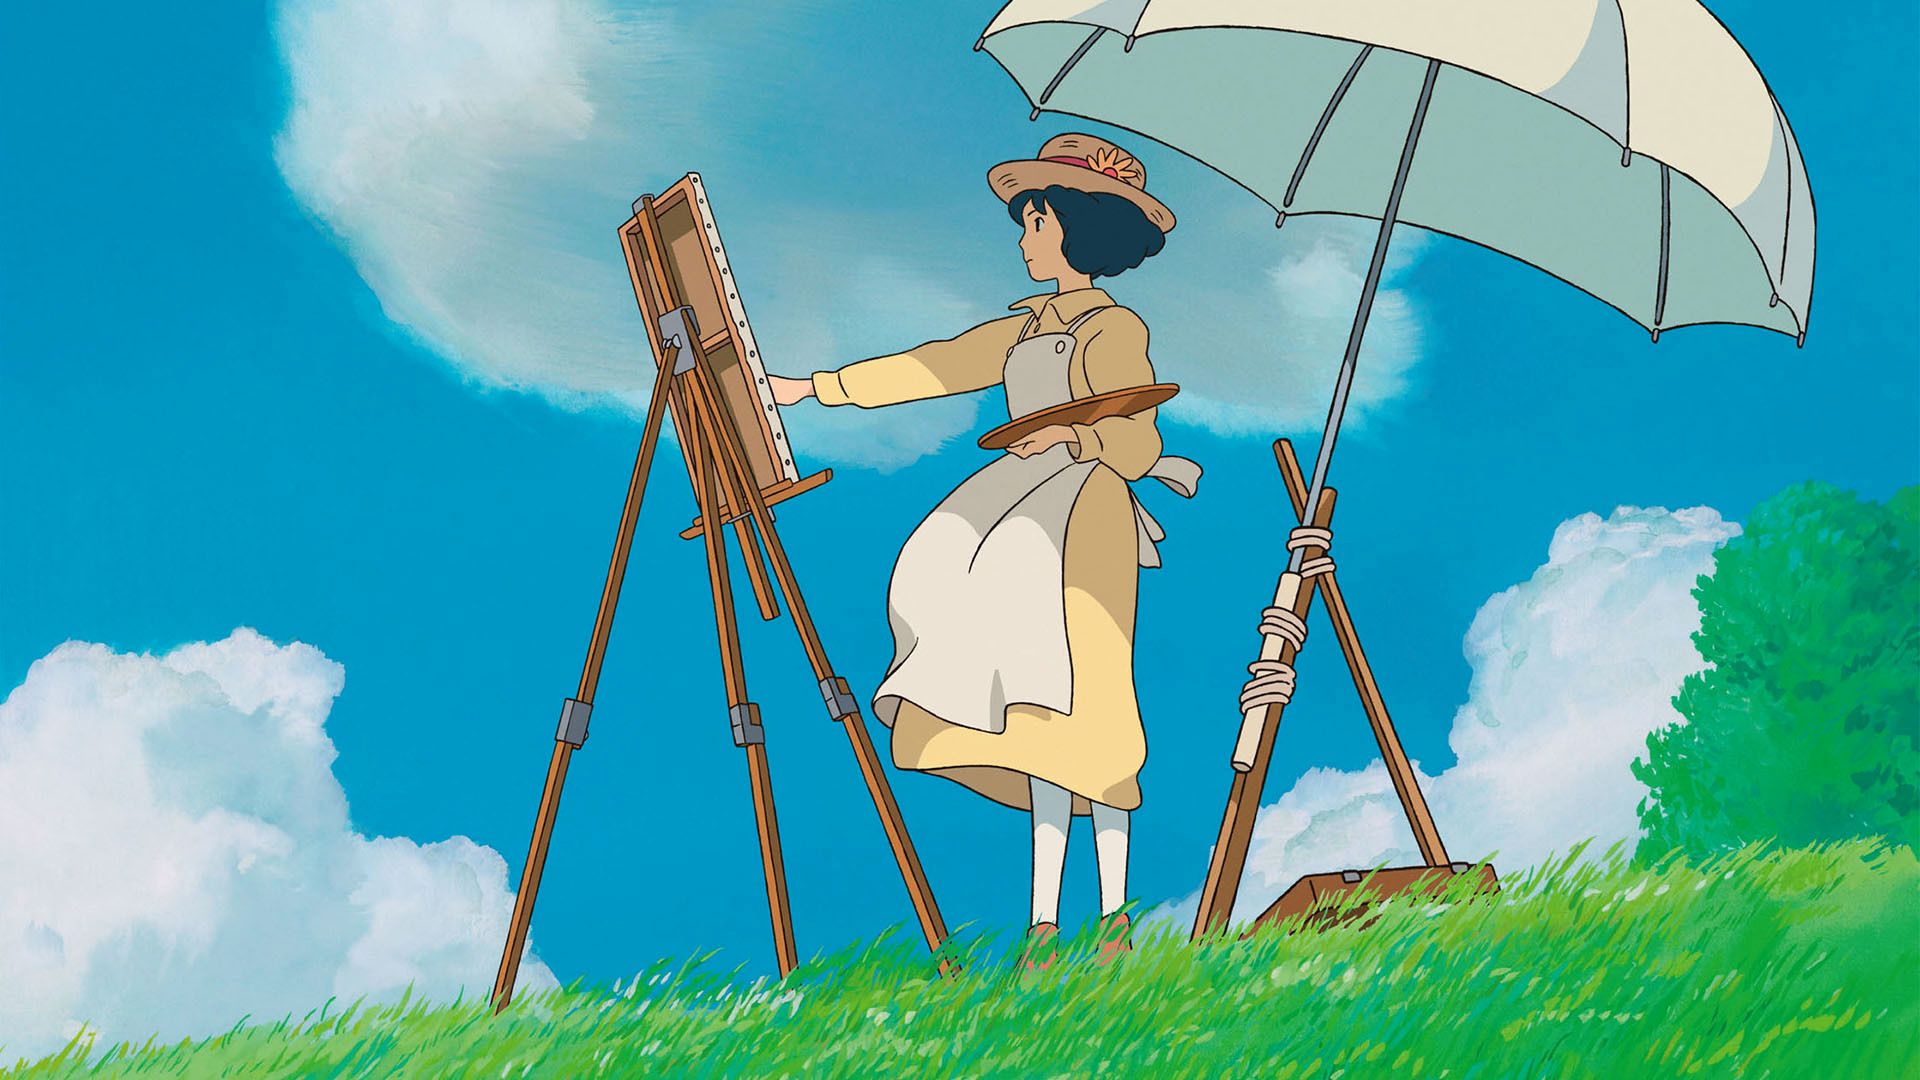 The Wind Rises background